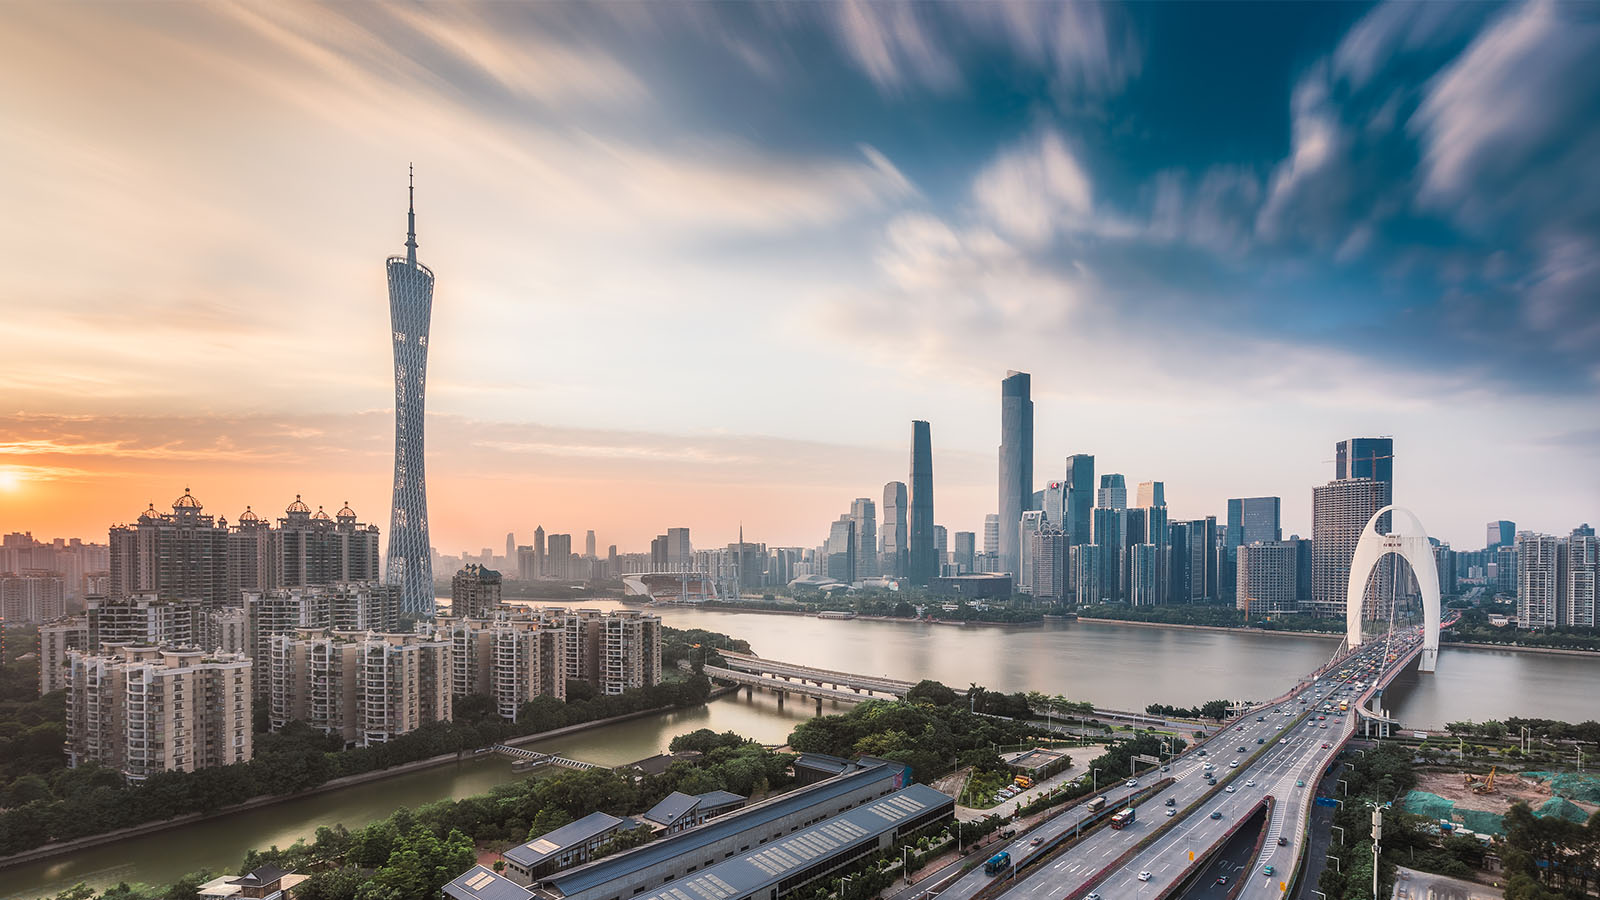 The TV tower and Liede Bridge over the Pearl River at sunset in Guangzhou, China